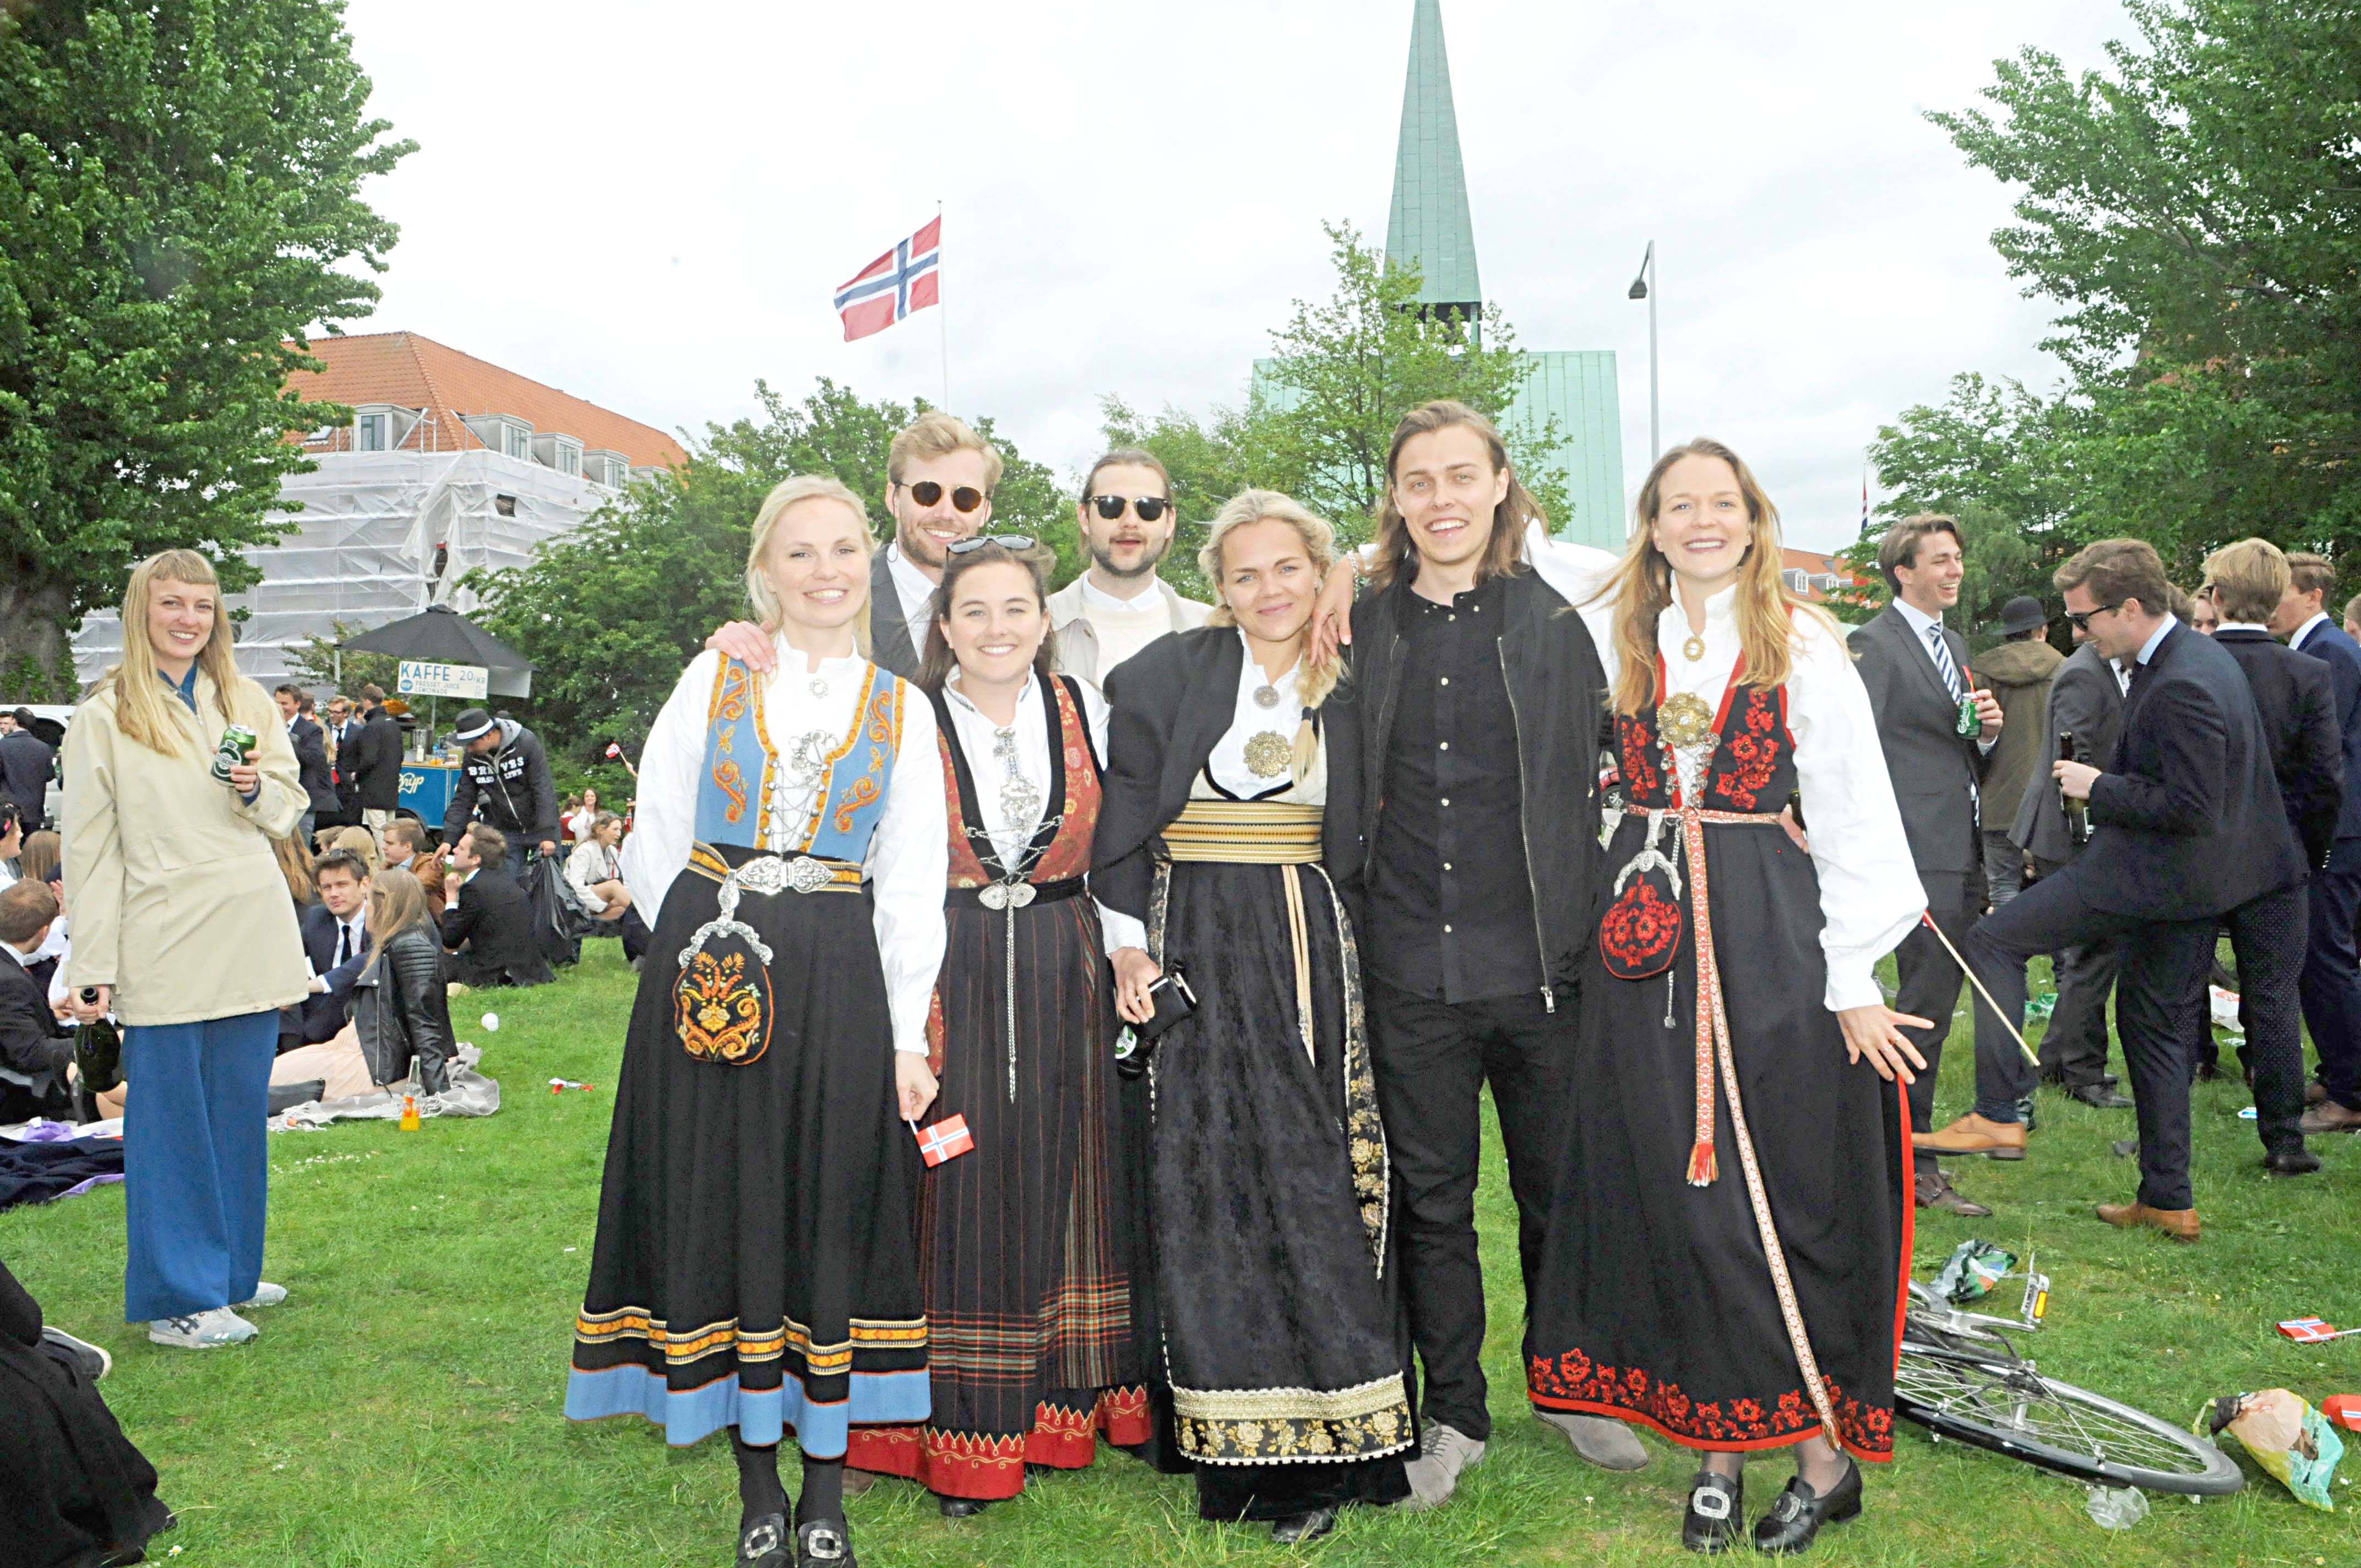 About Town: Larks in the park on Norwegian Constitution Day